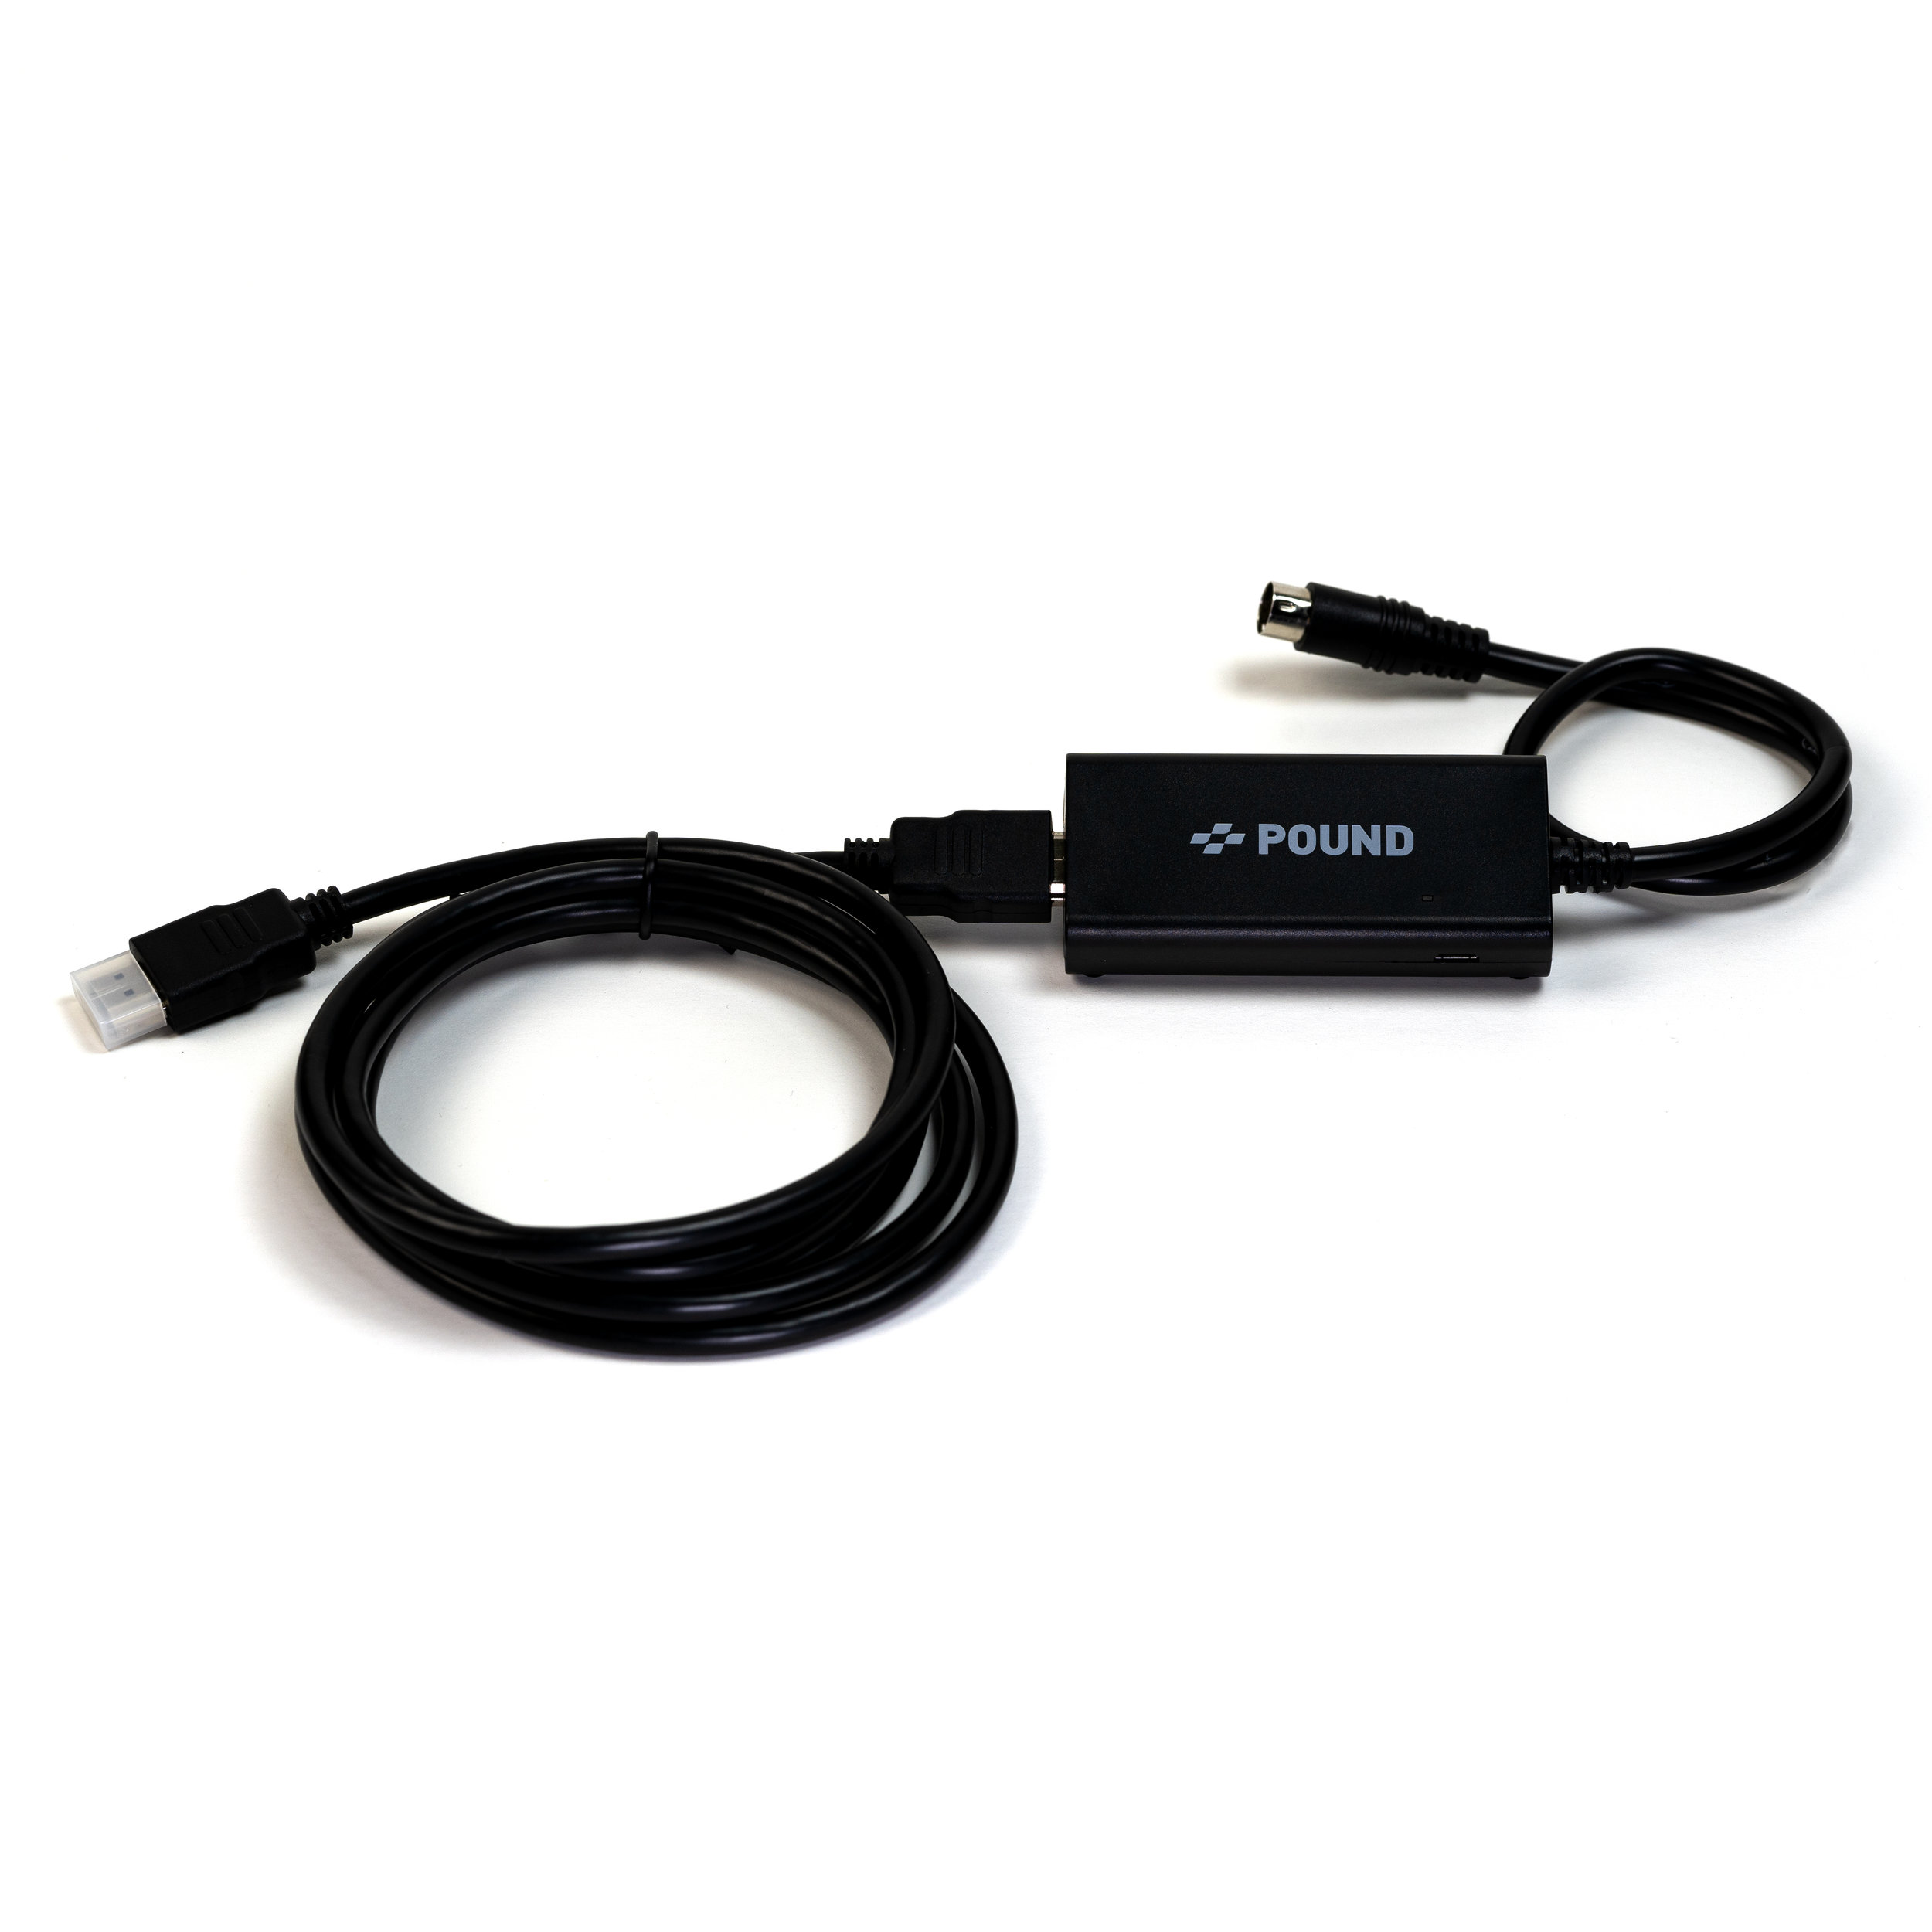 Sega Genesis HD LINK Cable by Pound Technology